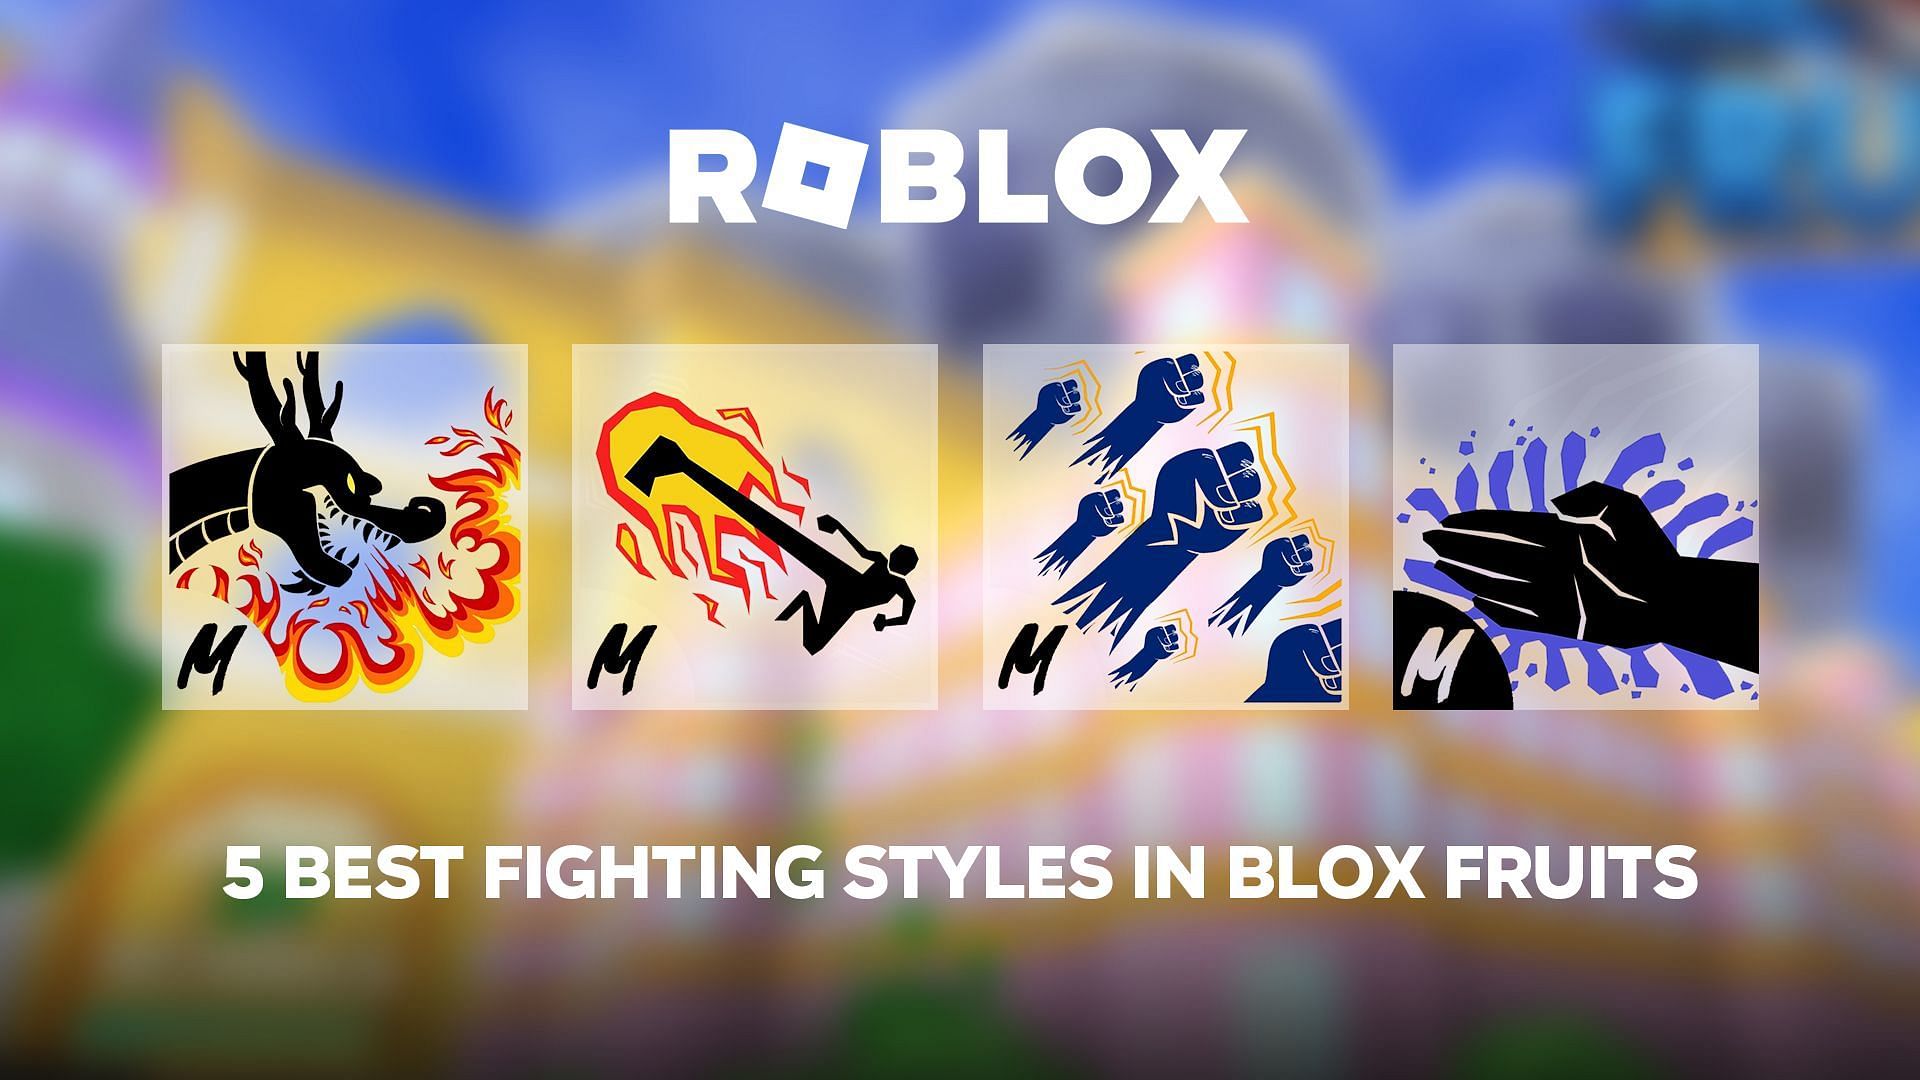 Featured image of the Fighting Styles in Roblox Blox Fruits (Image via Sportskeeda)